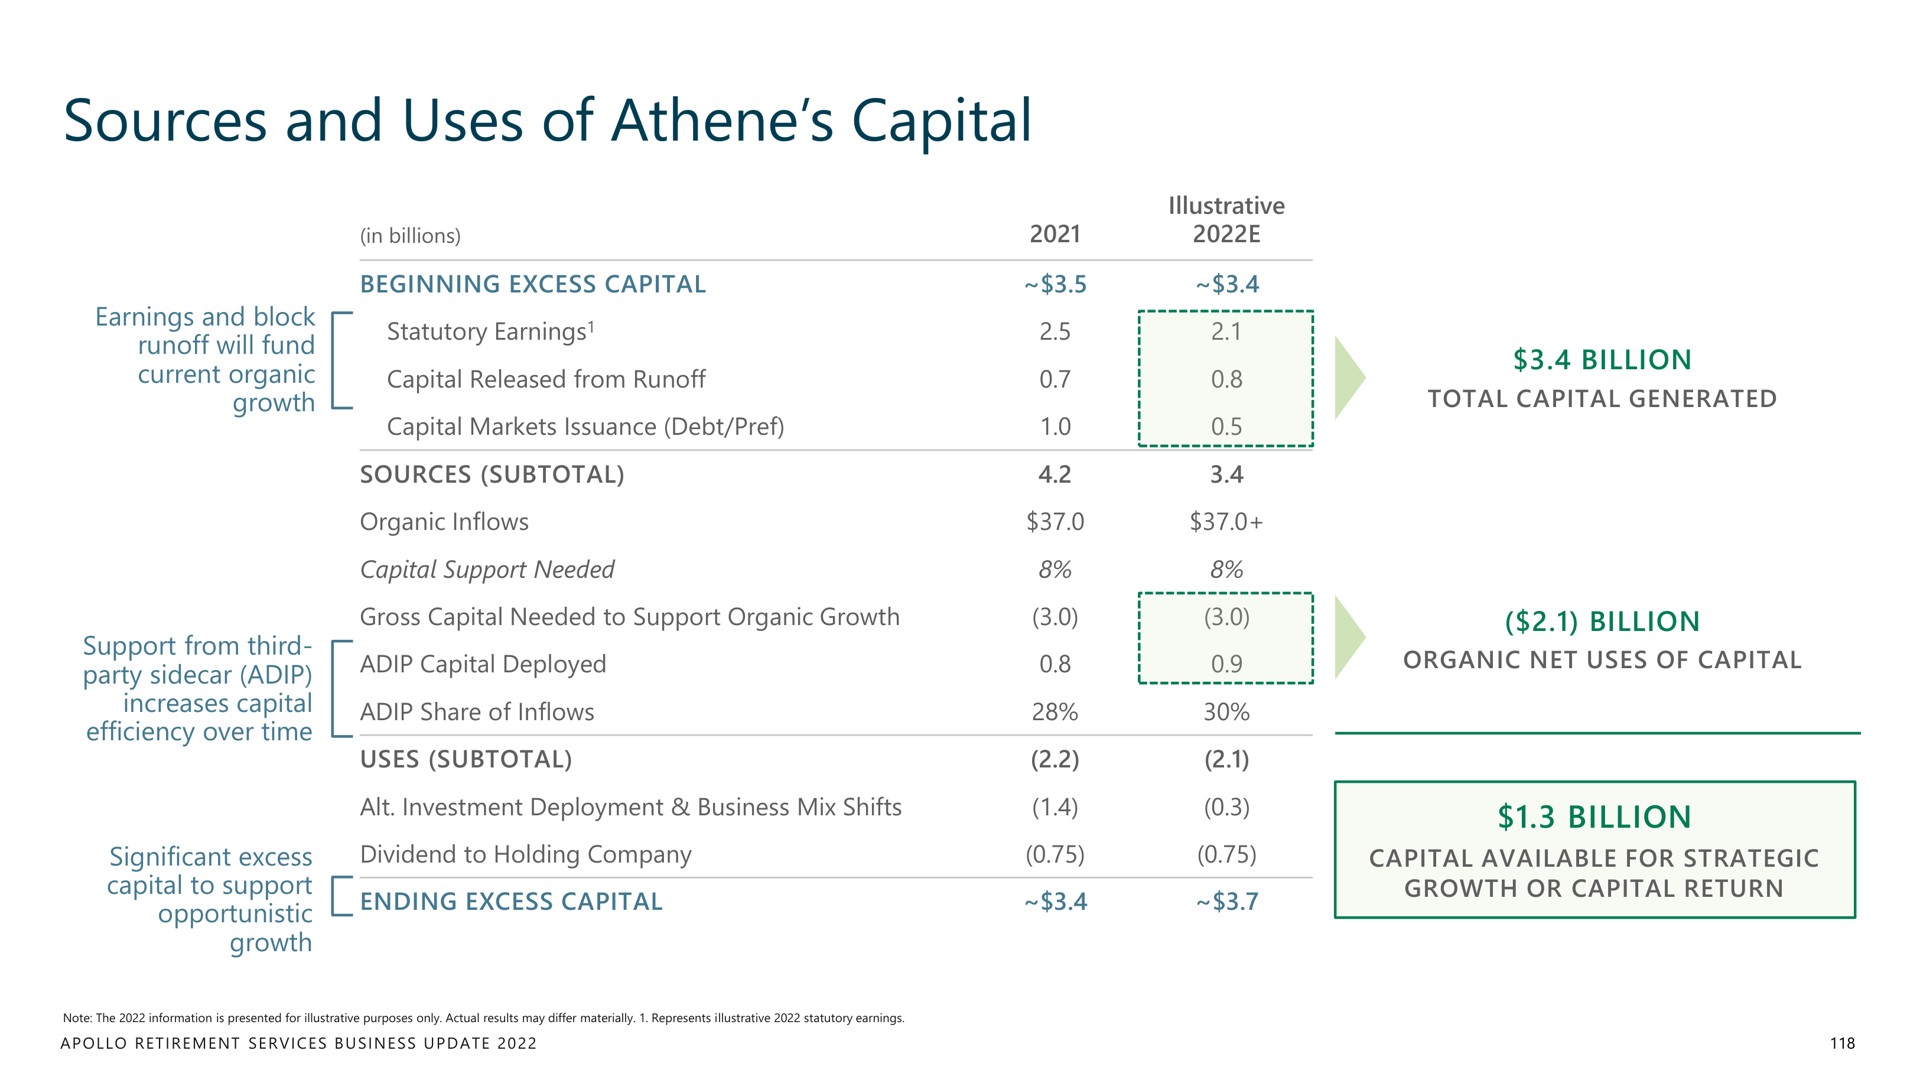 sources and uses of capital | Apollo Global Management